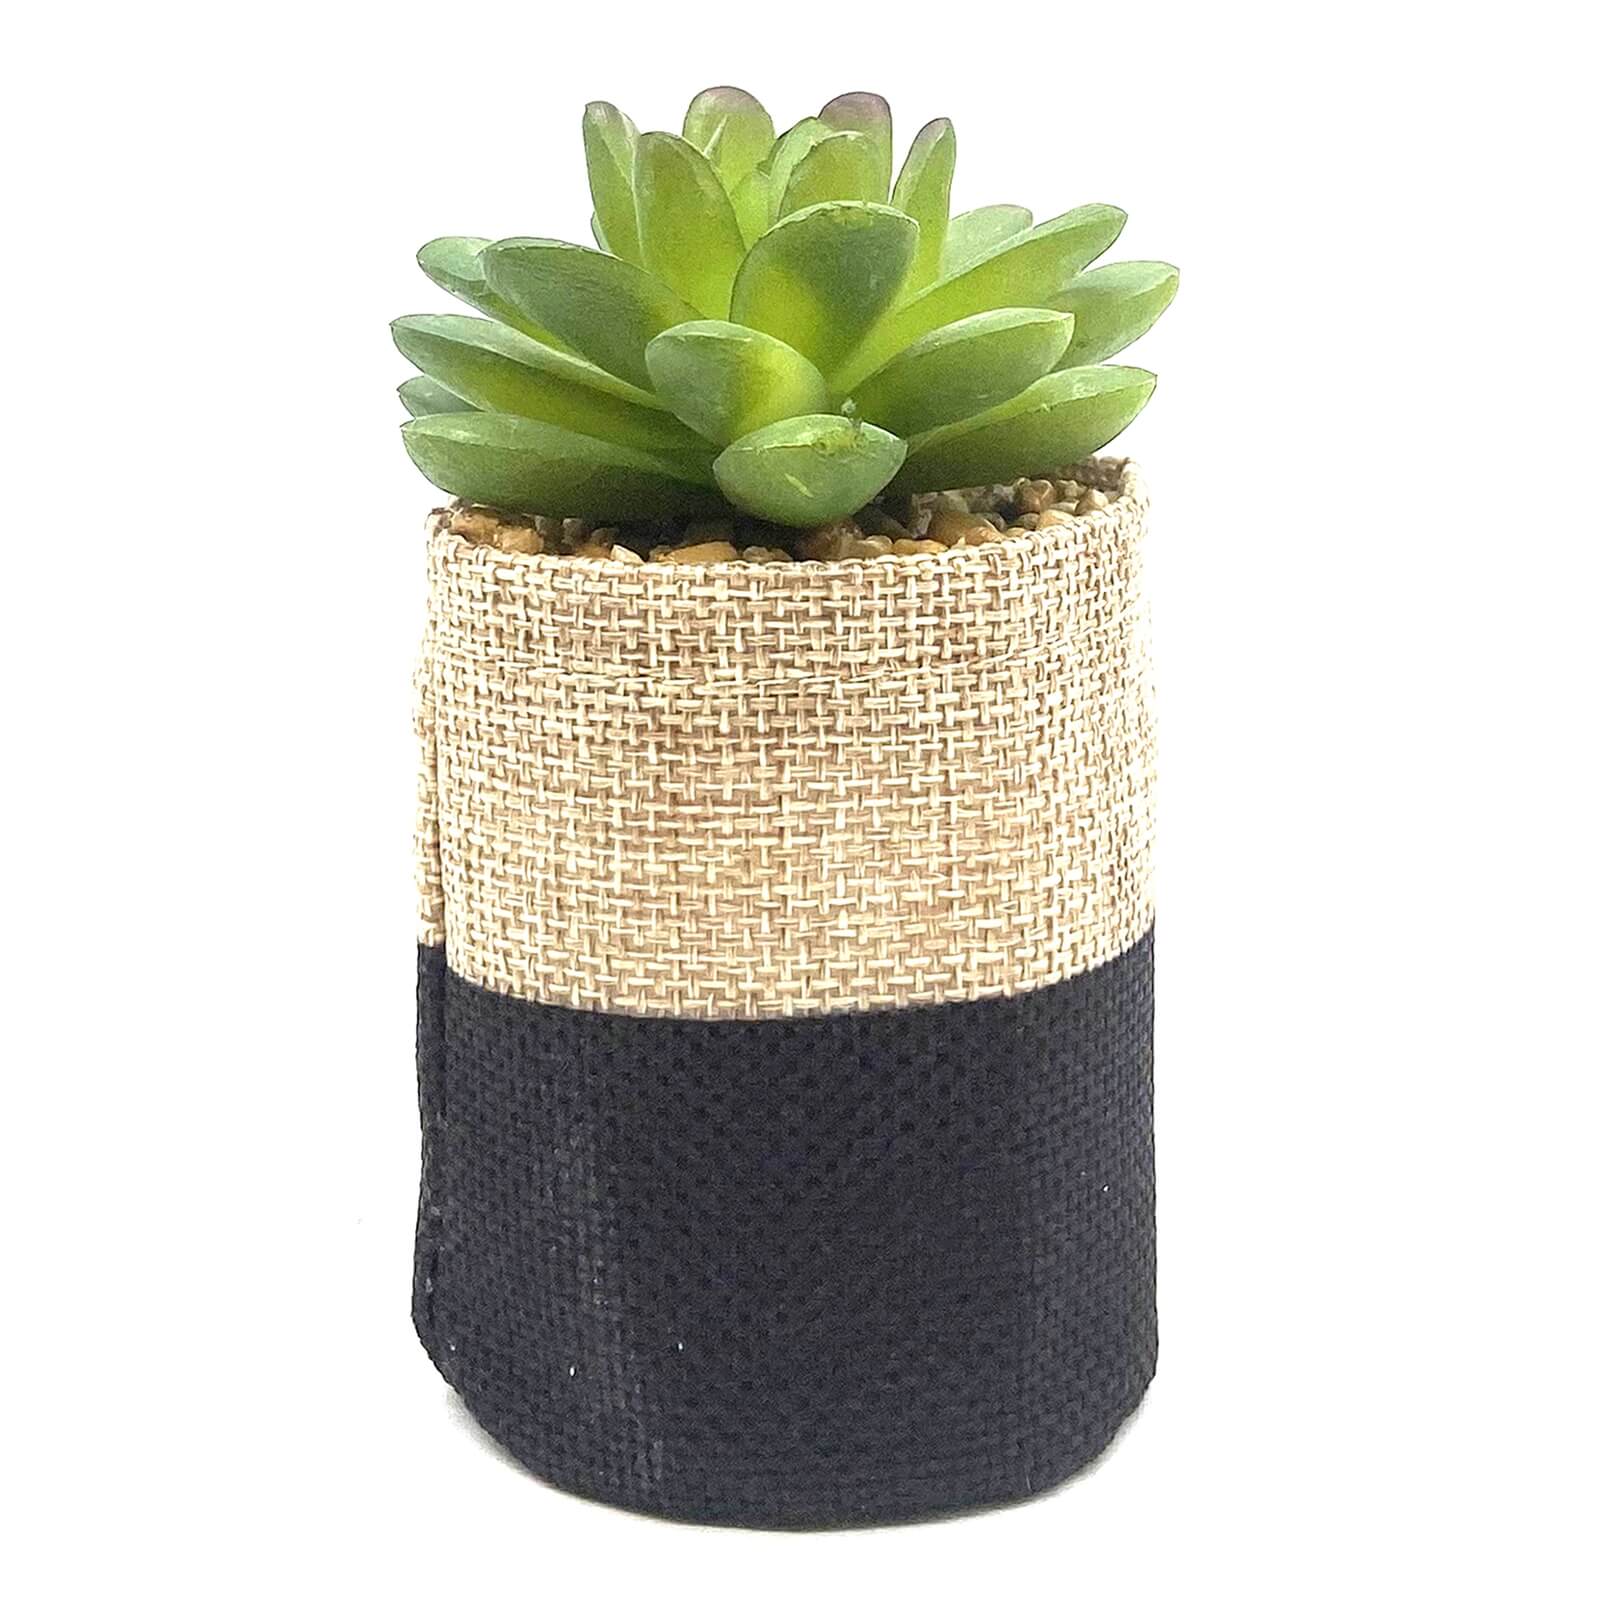 Small Plant in Two Tone Sack - Black & Natural